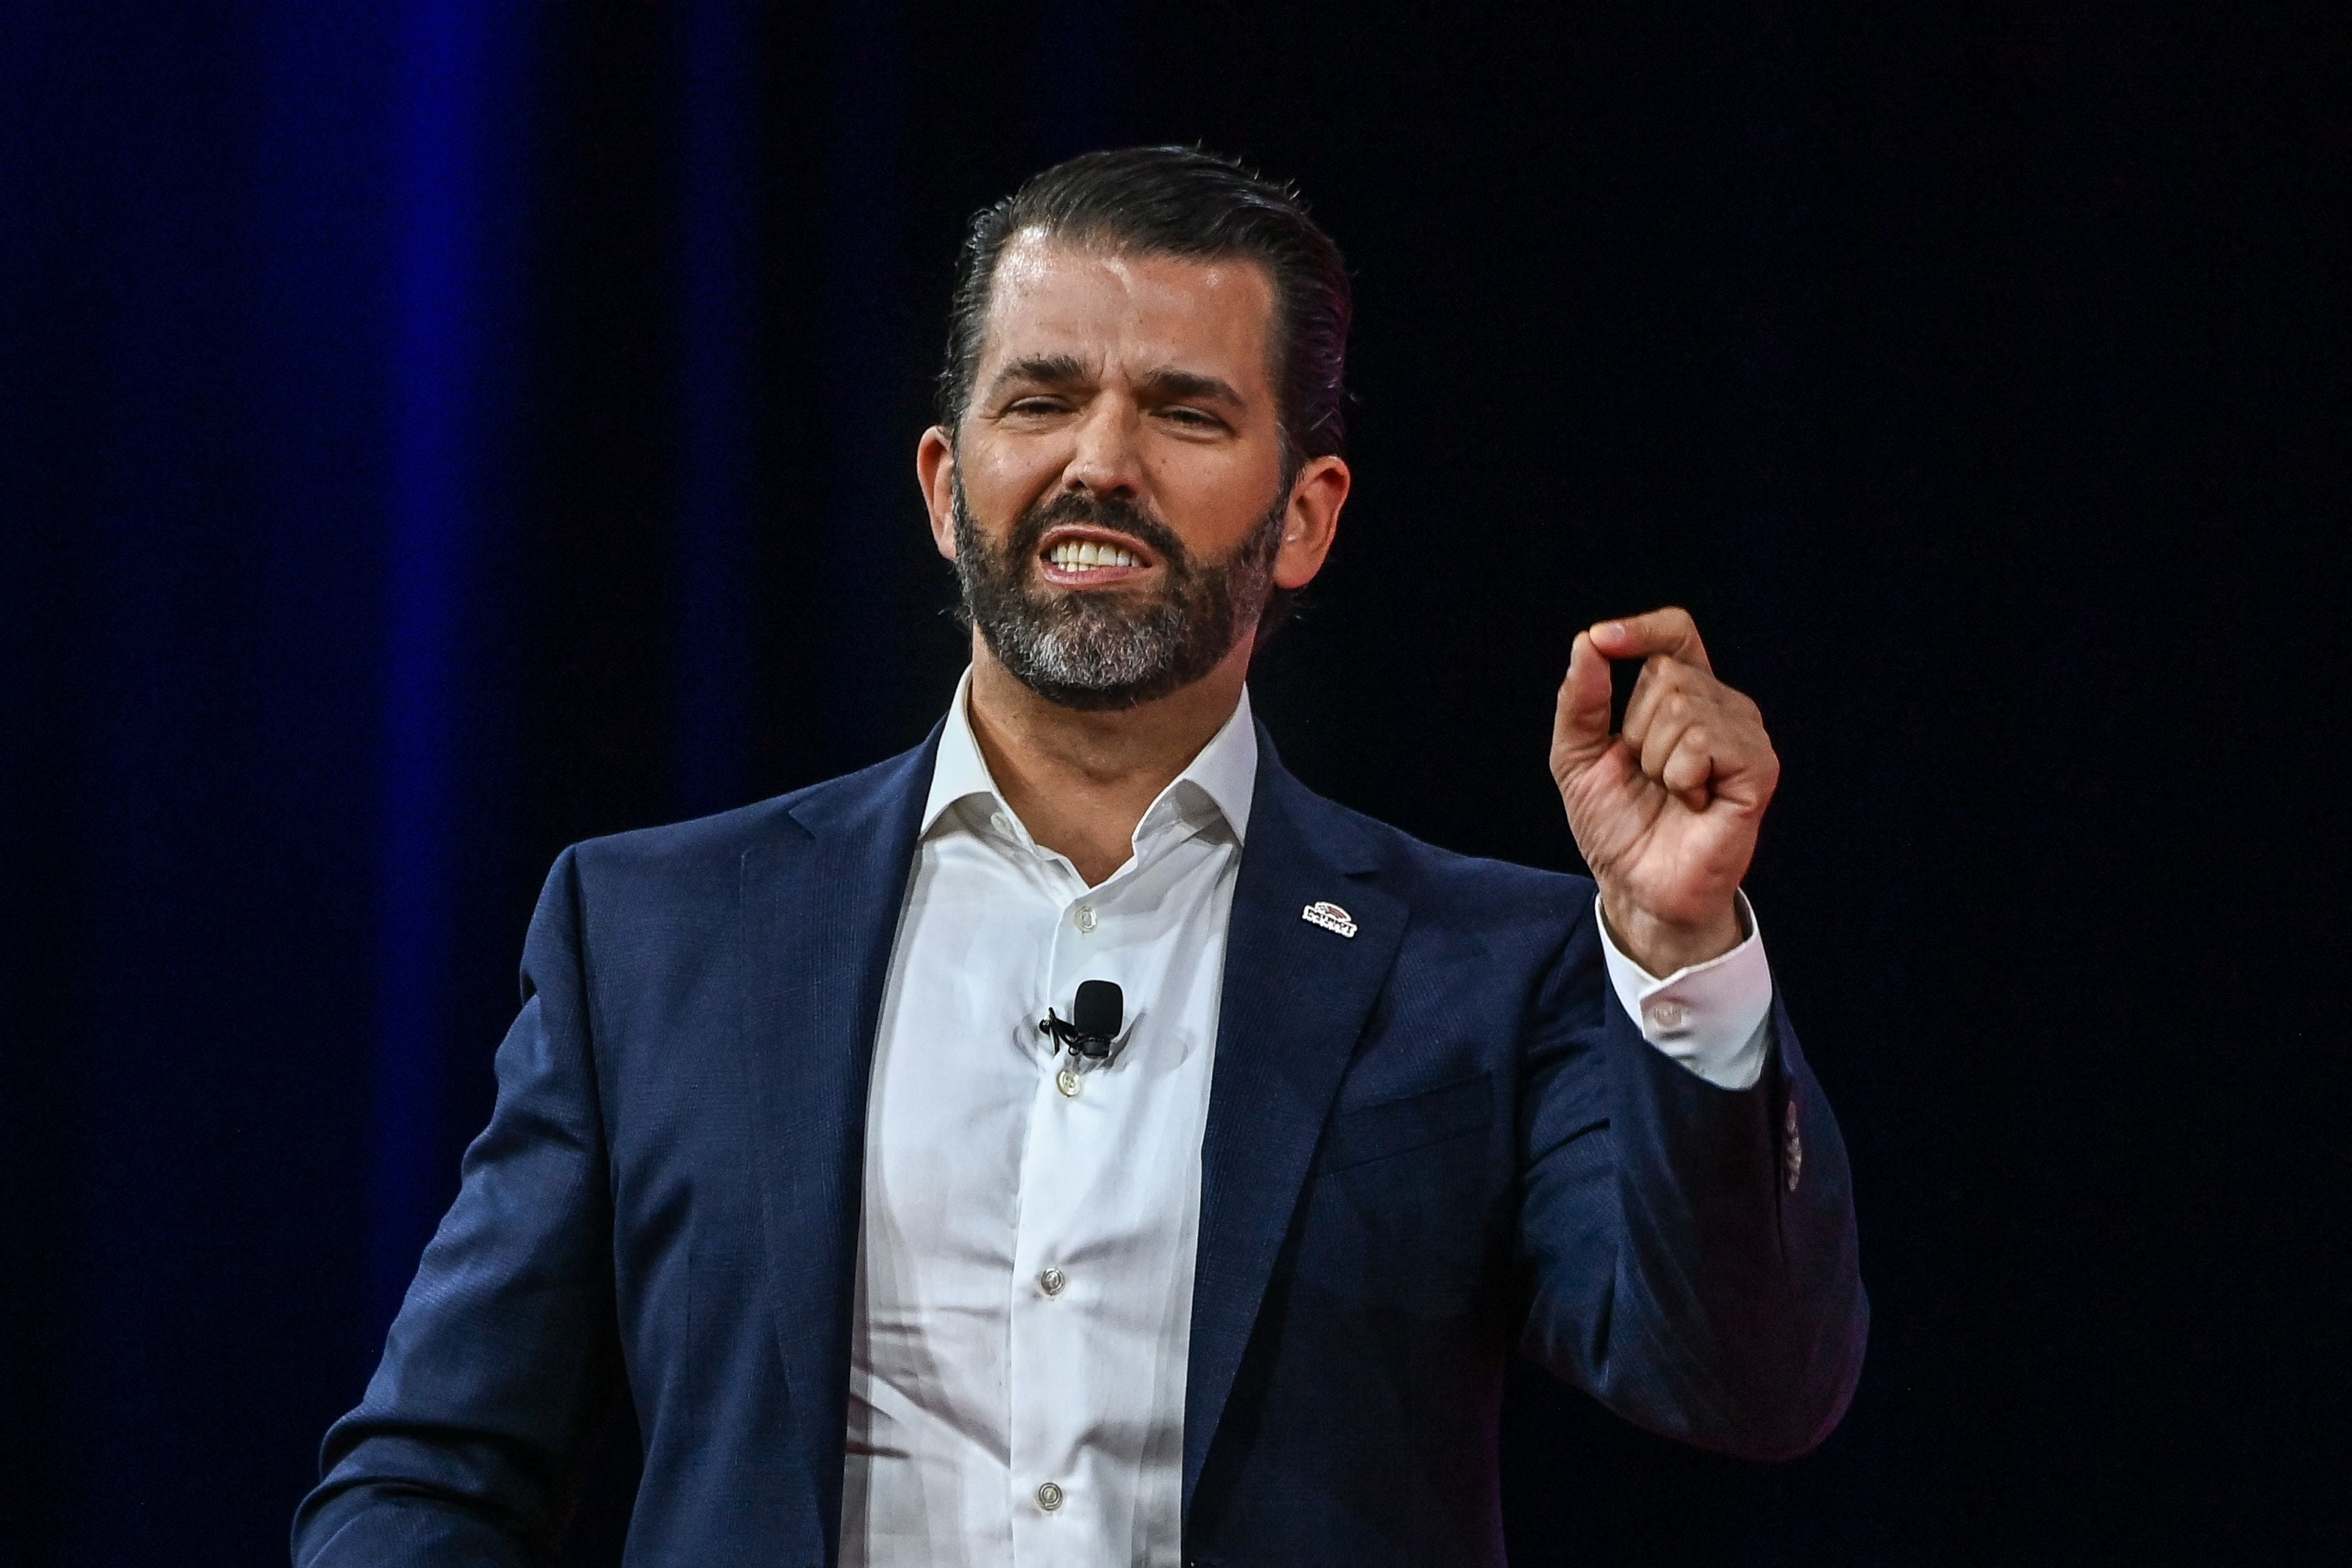 Donald Trump Jr., son of former US President Donald Trump, speaks at the Conservative Political Action Conference in February